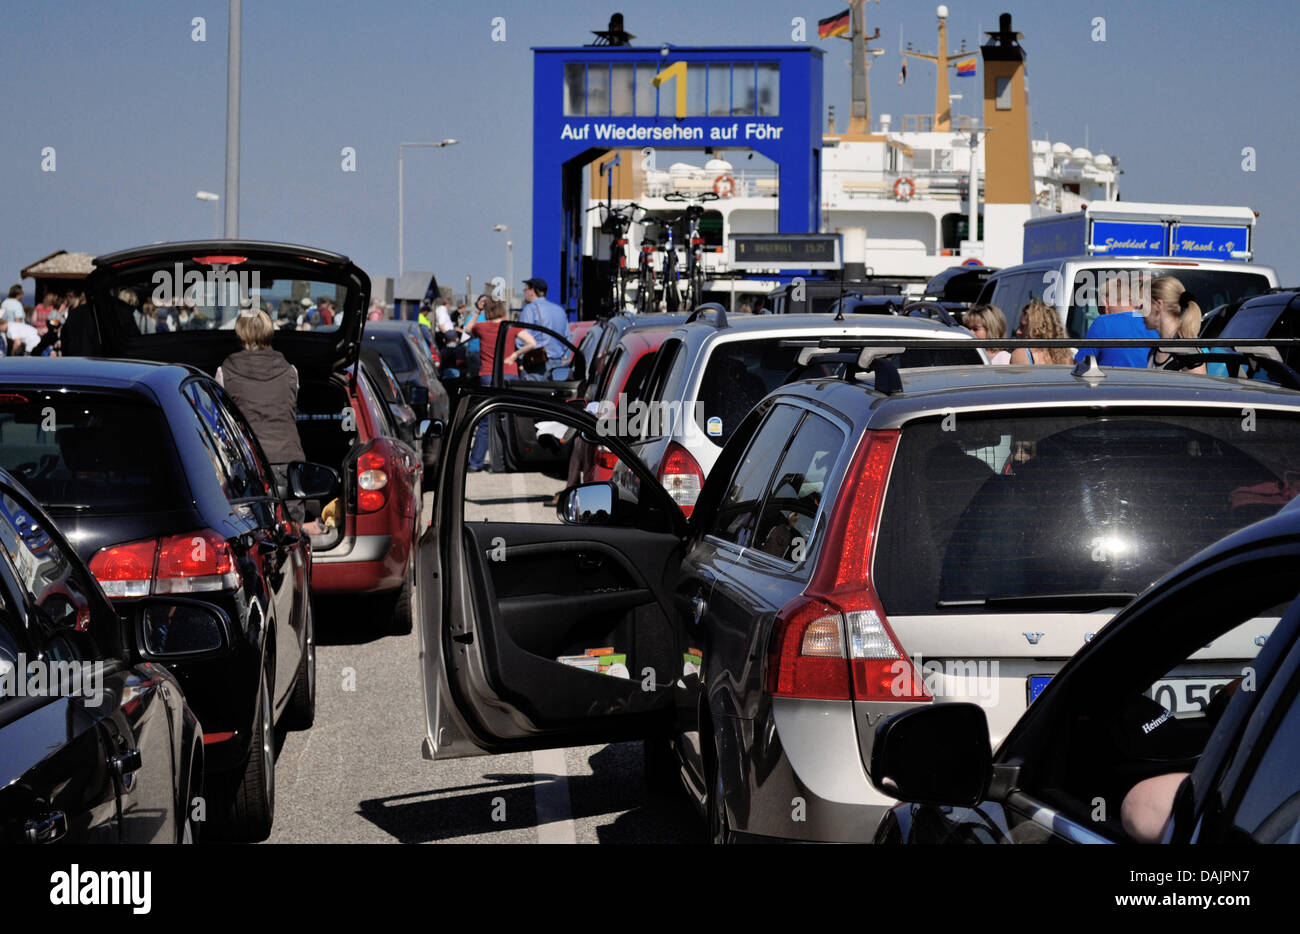 Cars wait for a ferry on the isaland of Foehr in Wyk, Germany, 25 April 2011. Sunny weather throughout the Easter holiday has kept places at the sea busy with weekend visitors in Germany. Photo: Hans-Juergen Ehlers Stock Photo